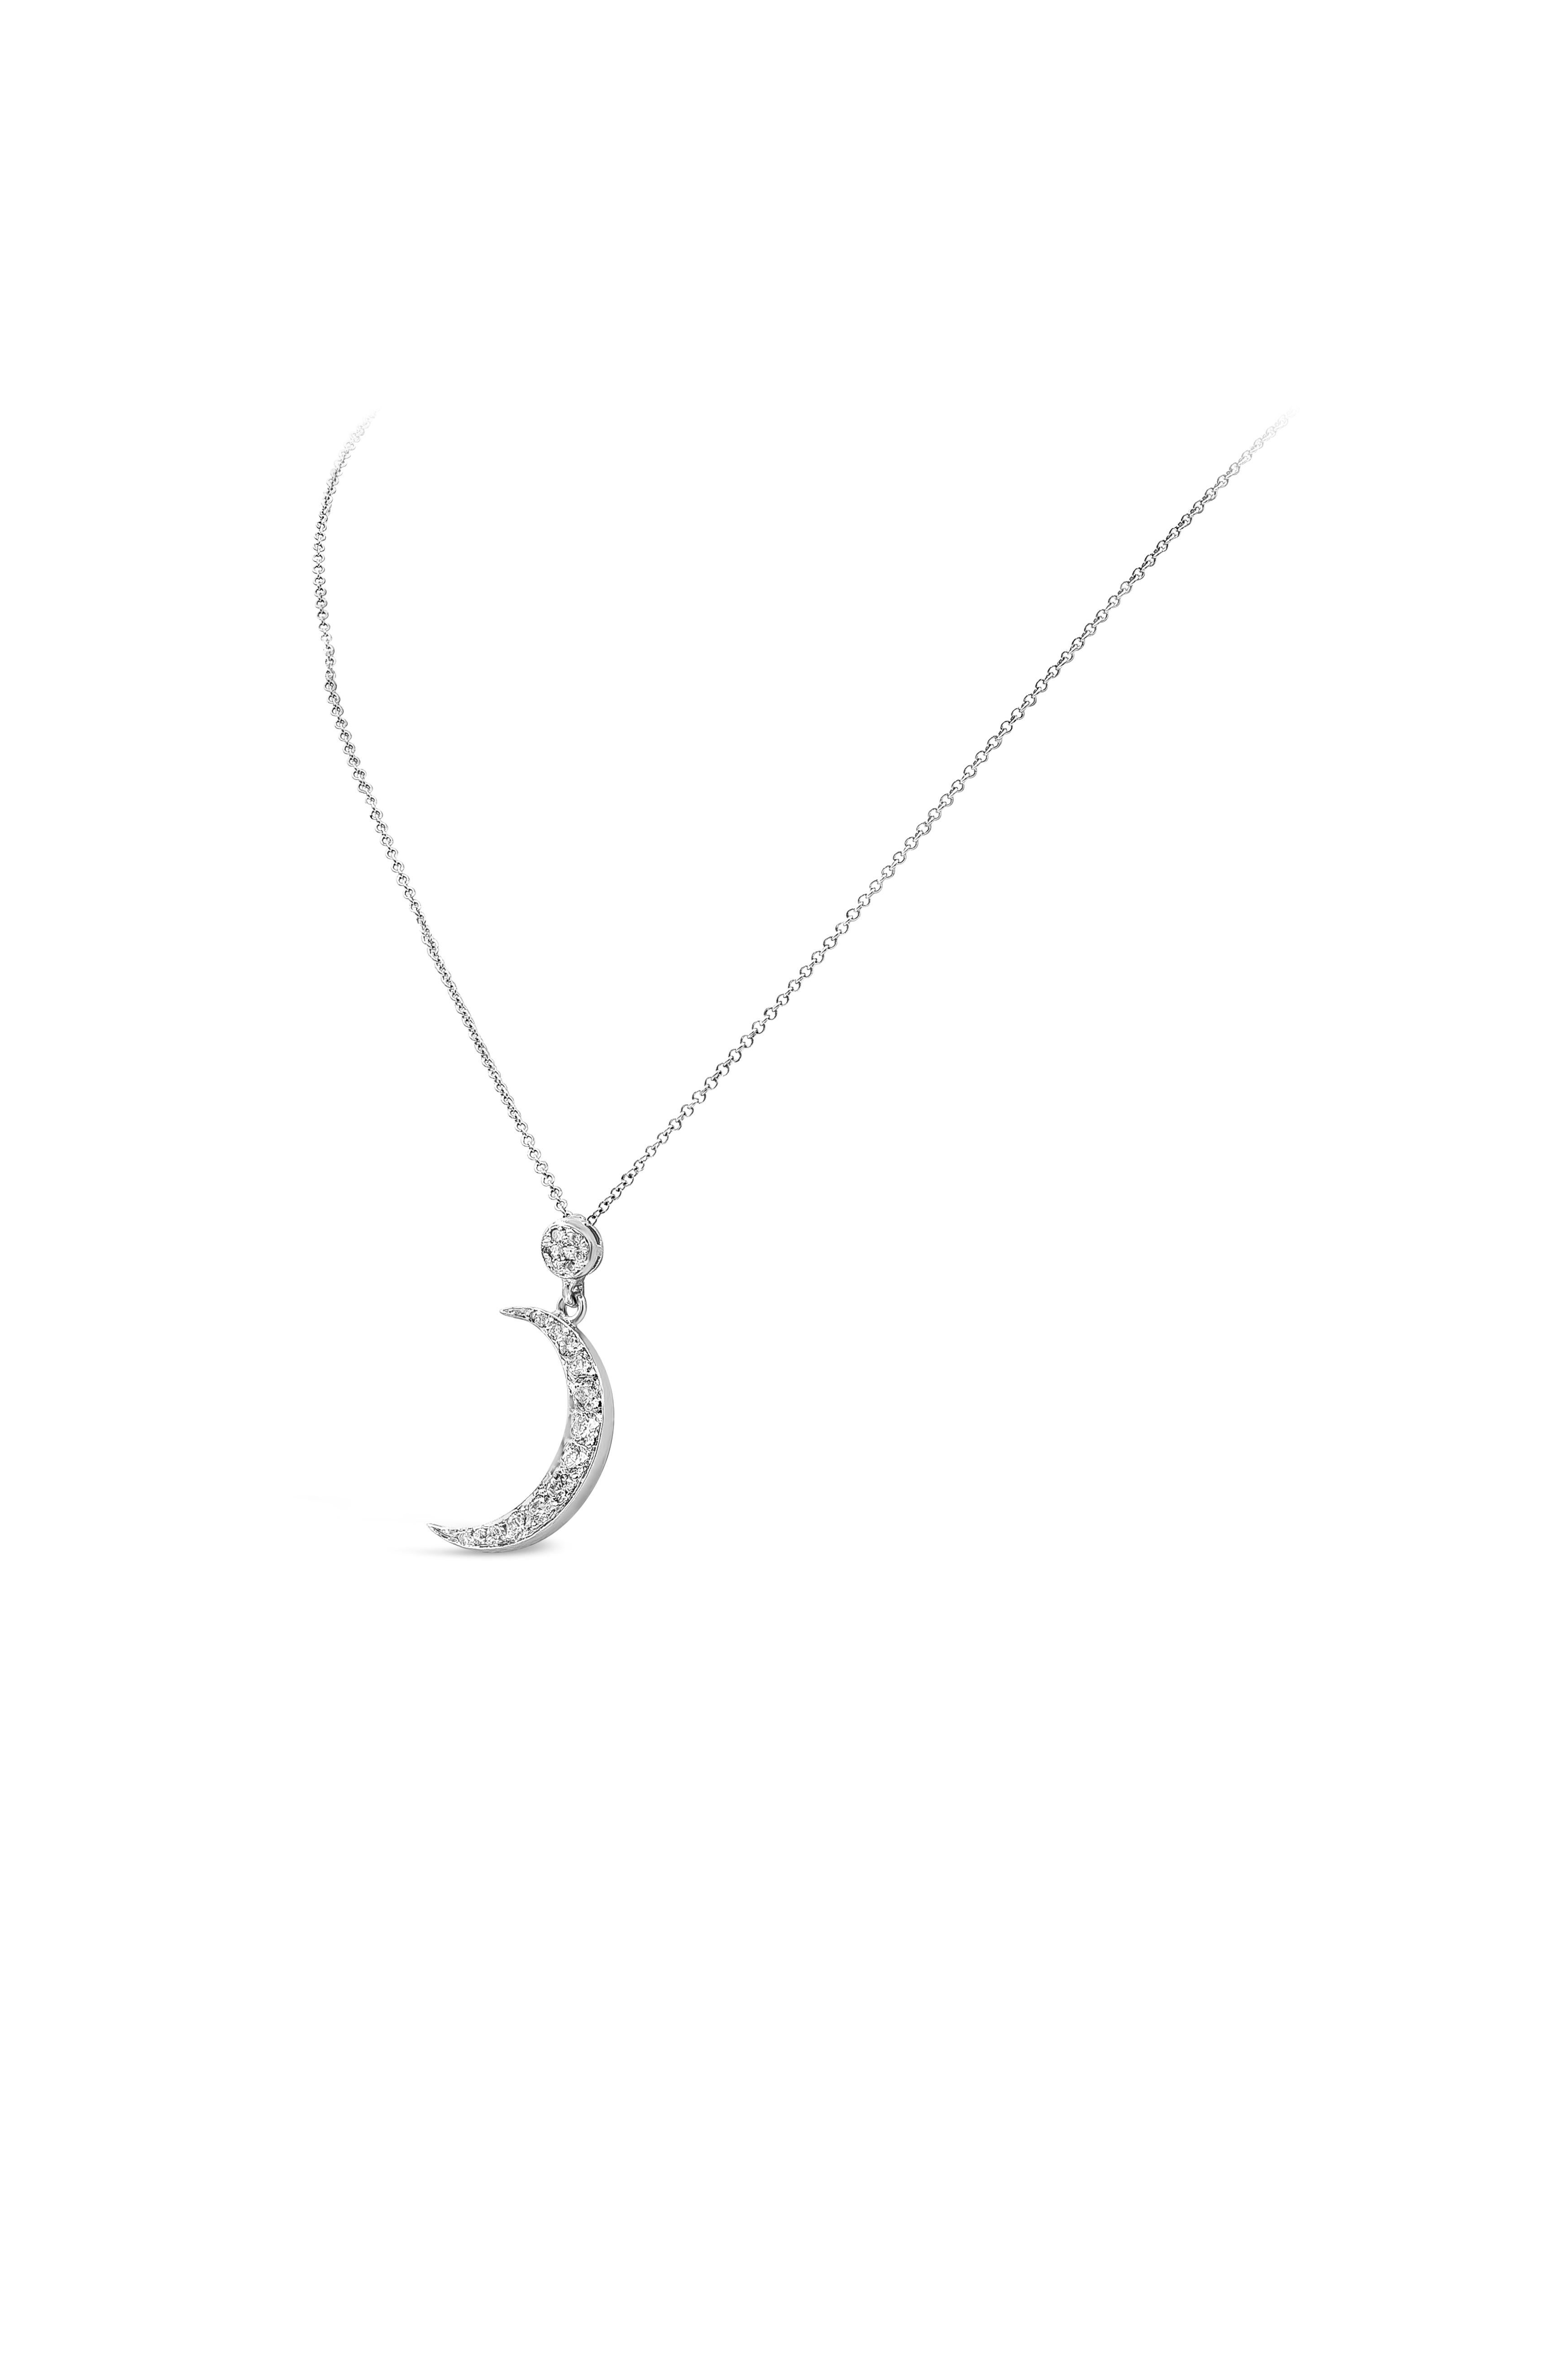 Perfect for everyday use, crescent moon set with round brilliant diamonds weighing 0.51 carats total. Made in 14K White Gold. Suspended on an 18 inch White Gold chain. 

Roman Malakov is a custom house, specializing in creating anything you can